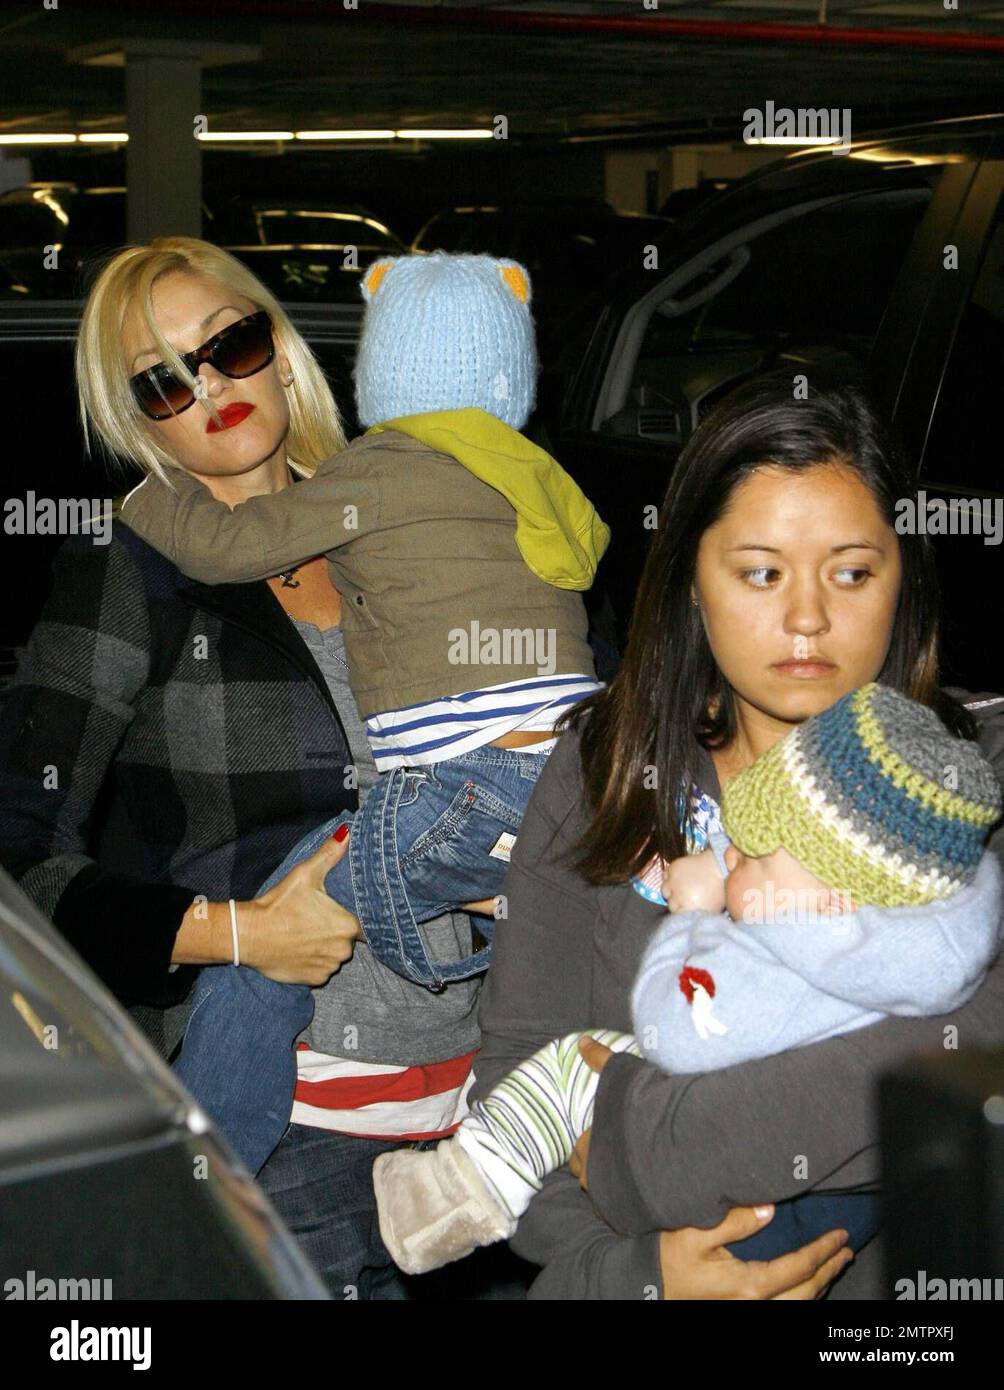 The work never ends for doting mom Gwen Stefani. She toted her two sons, Zuma, 3 months, and Kingston, 2, to the doctor today and stopped in at a pharmacy afterwards, clutching a small prescription bag as she left. Now that baby Zuma is getting older, Stefani is making plans to head back to work. Gwen's group, No Doubt, announced on its Website recently that they'll be touring in 2009 in support of their first new album in seven years. Meanwhile, reports are that Stefani is 'annoyed' that husband Gavin included a duet, 'Some Days,' the two recorded for fun on his new album 'Wanderlust.' Los An Stock Photo